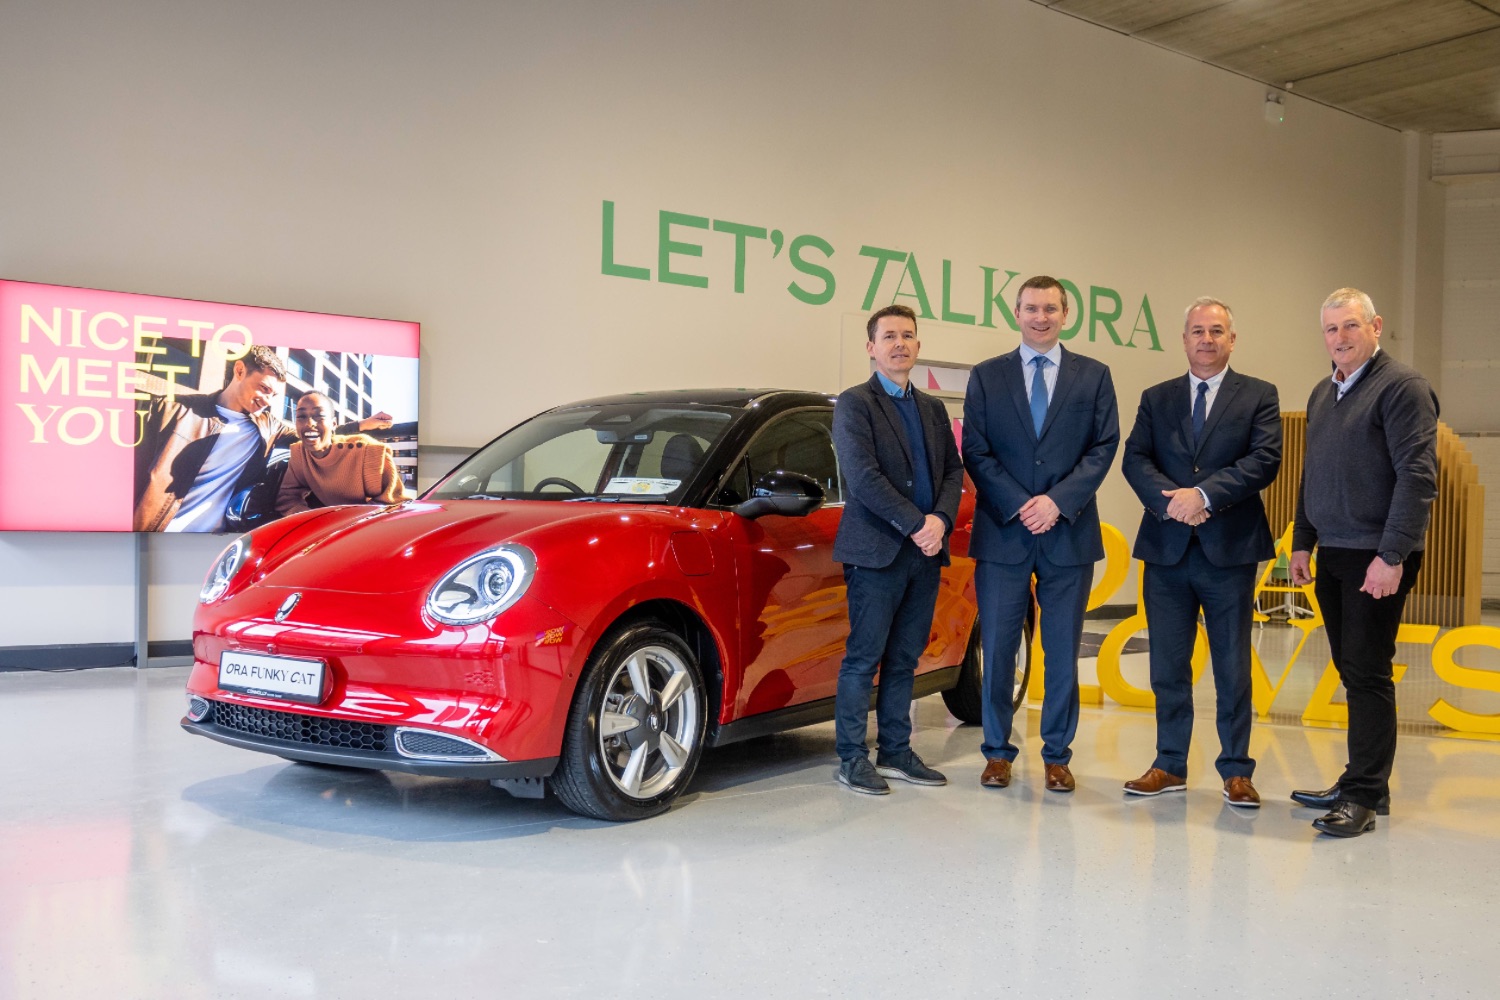 Car Industry News | Connolly group creates new jobs in Galway | CompleteCar.ie